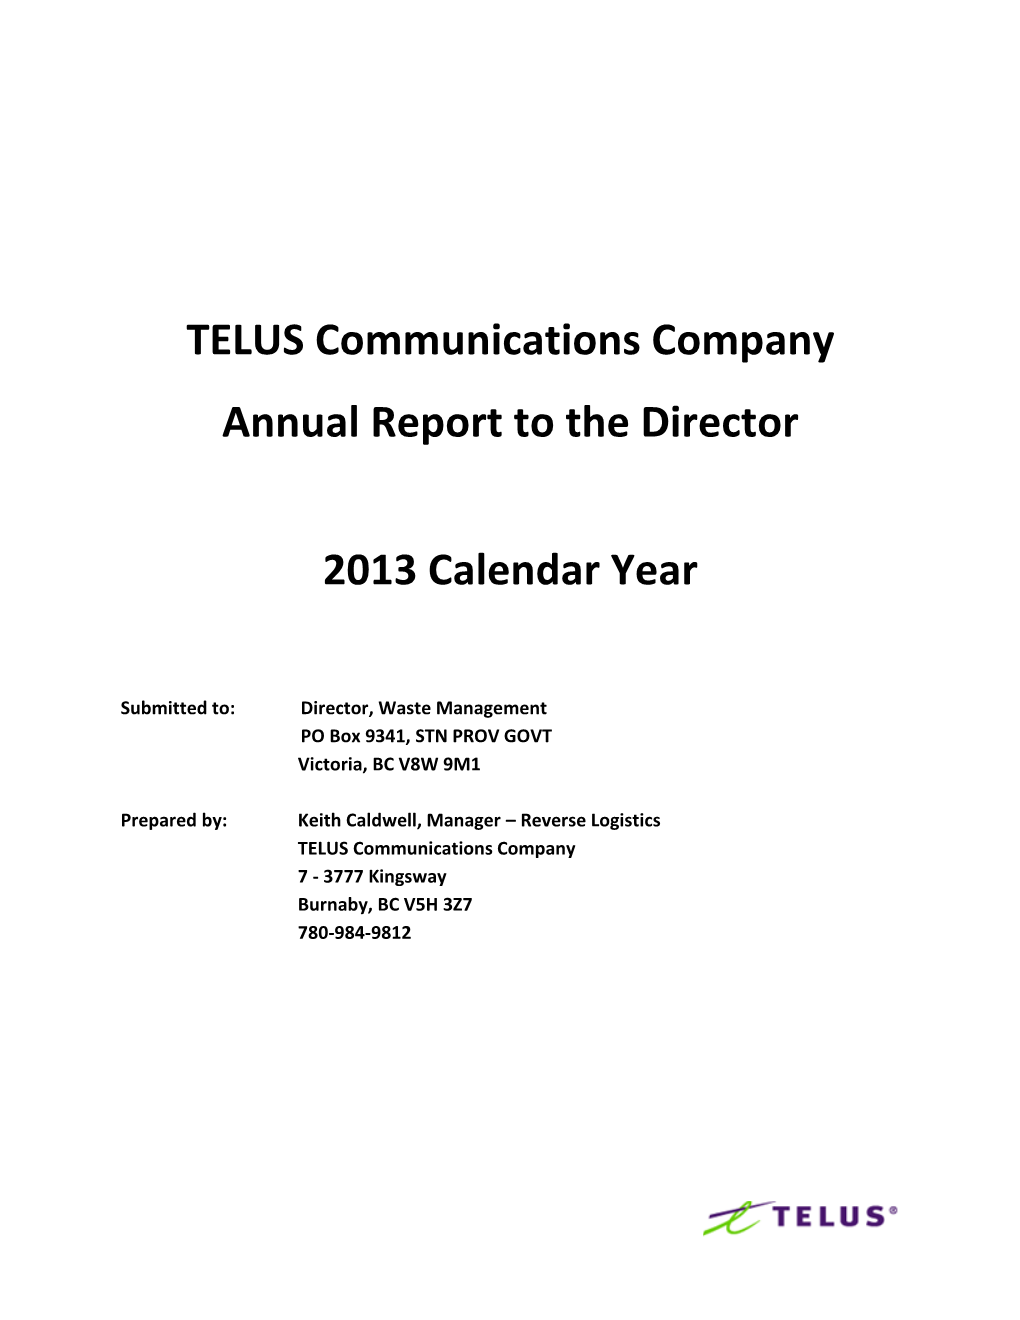 TELUS Communications Company Annual Report to the Director 2013